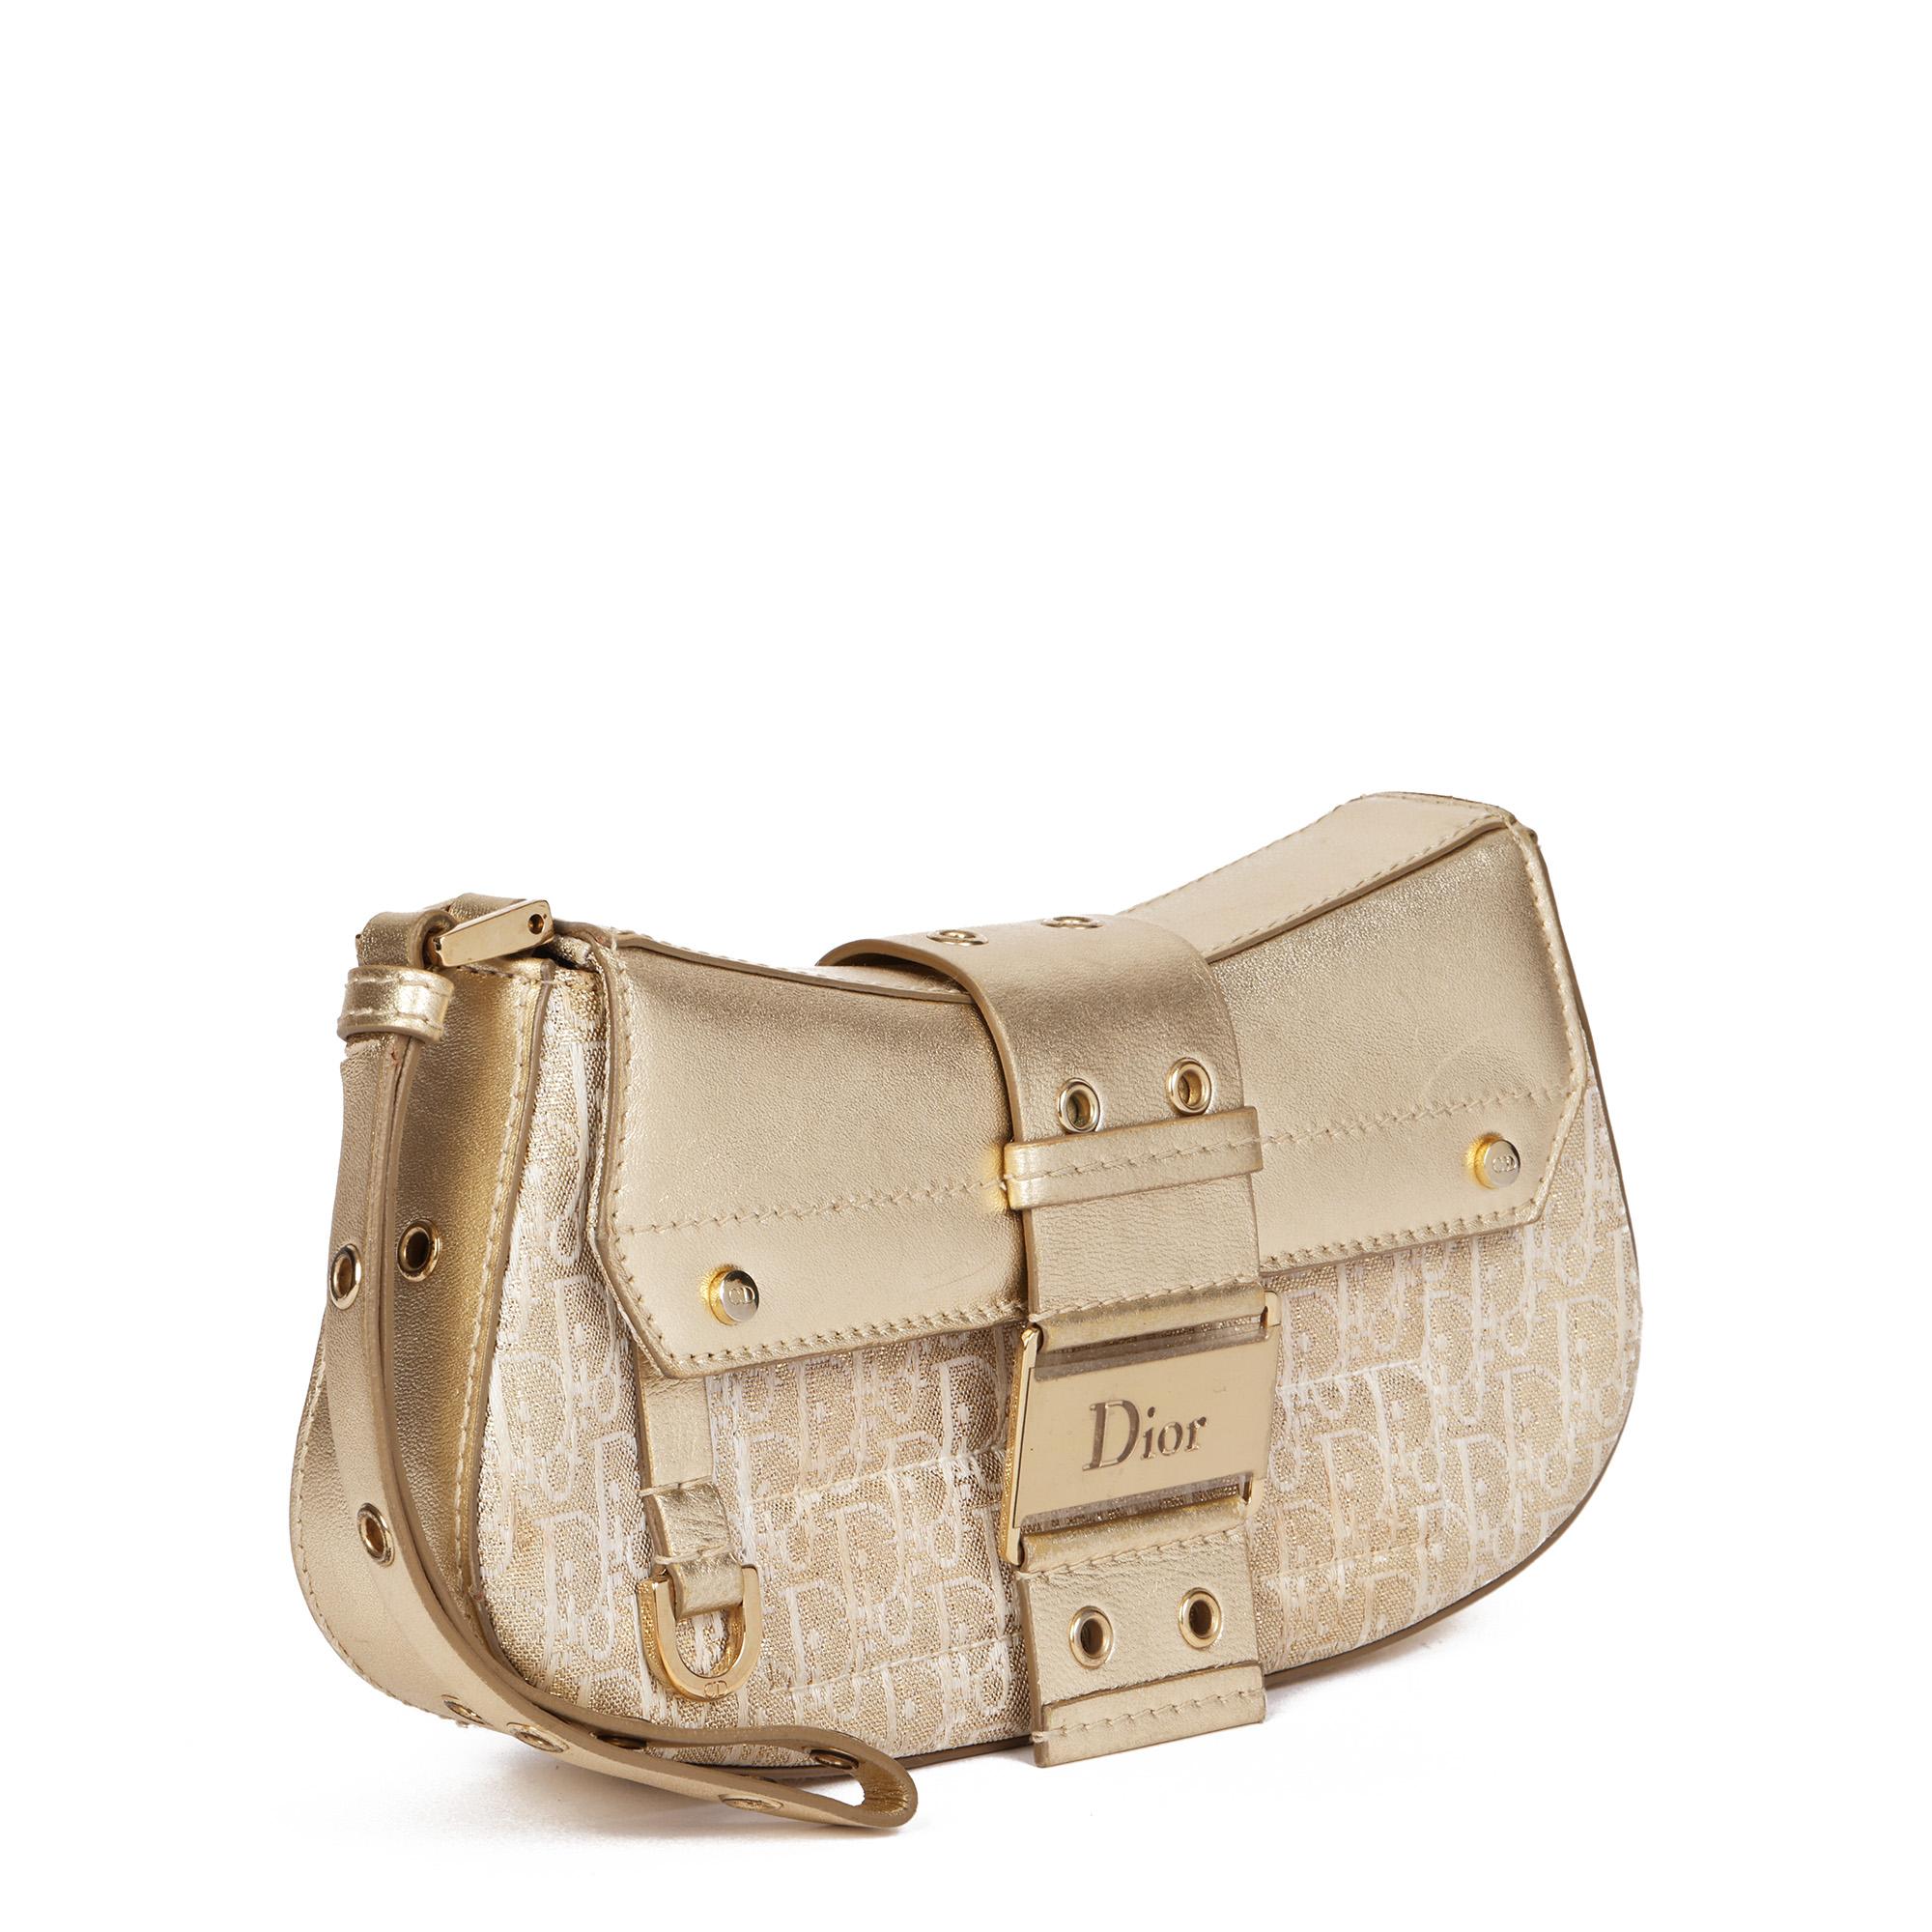 CHRISTIAN DIOR
Gold Monogram Canvas & Gold Calfskin Leather Vintage Columbus Wristlet

Xupes Reference: CB693
Serial Number: 15-MA-1012
Age (Circa): 2002
Authenticity Details: Date Stamp (Made in Italy)
Gender: Ladies
Type: Wristlet

Colour: